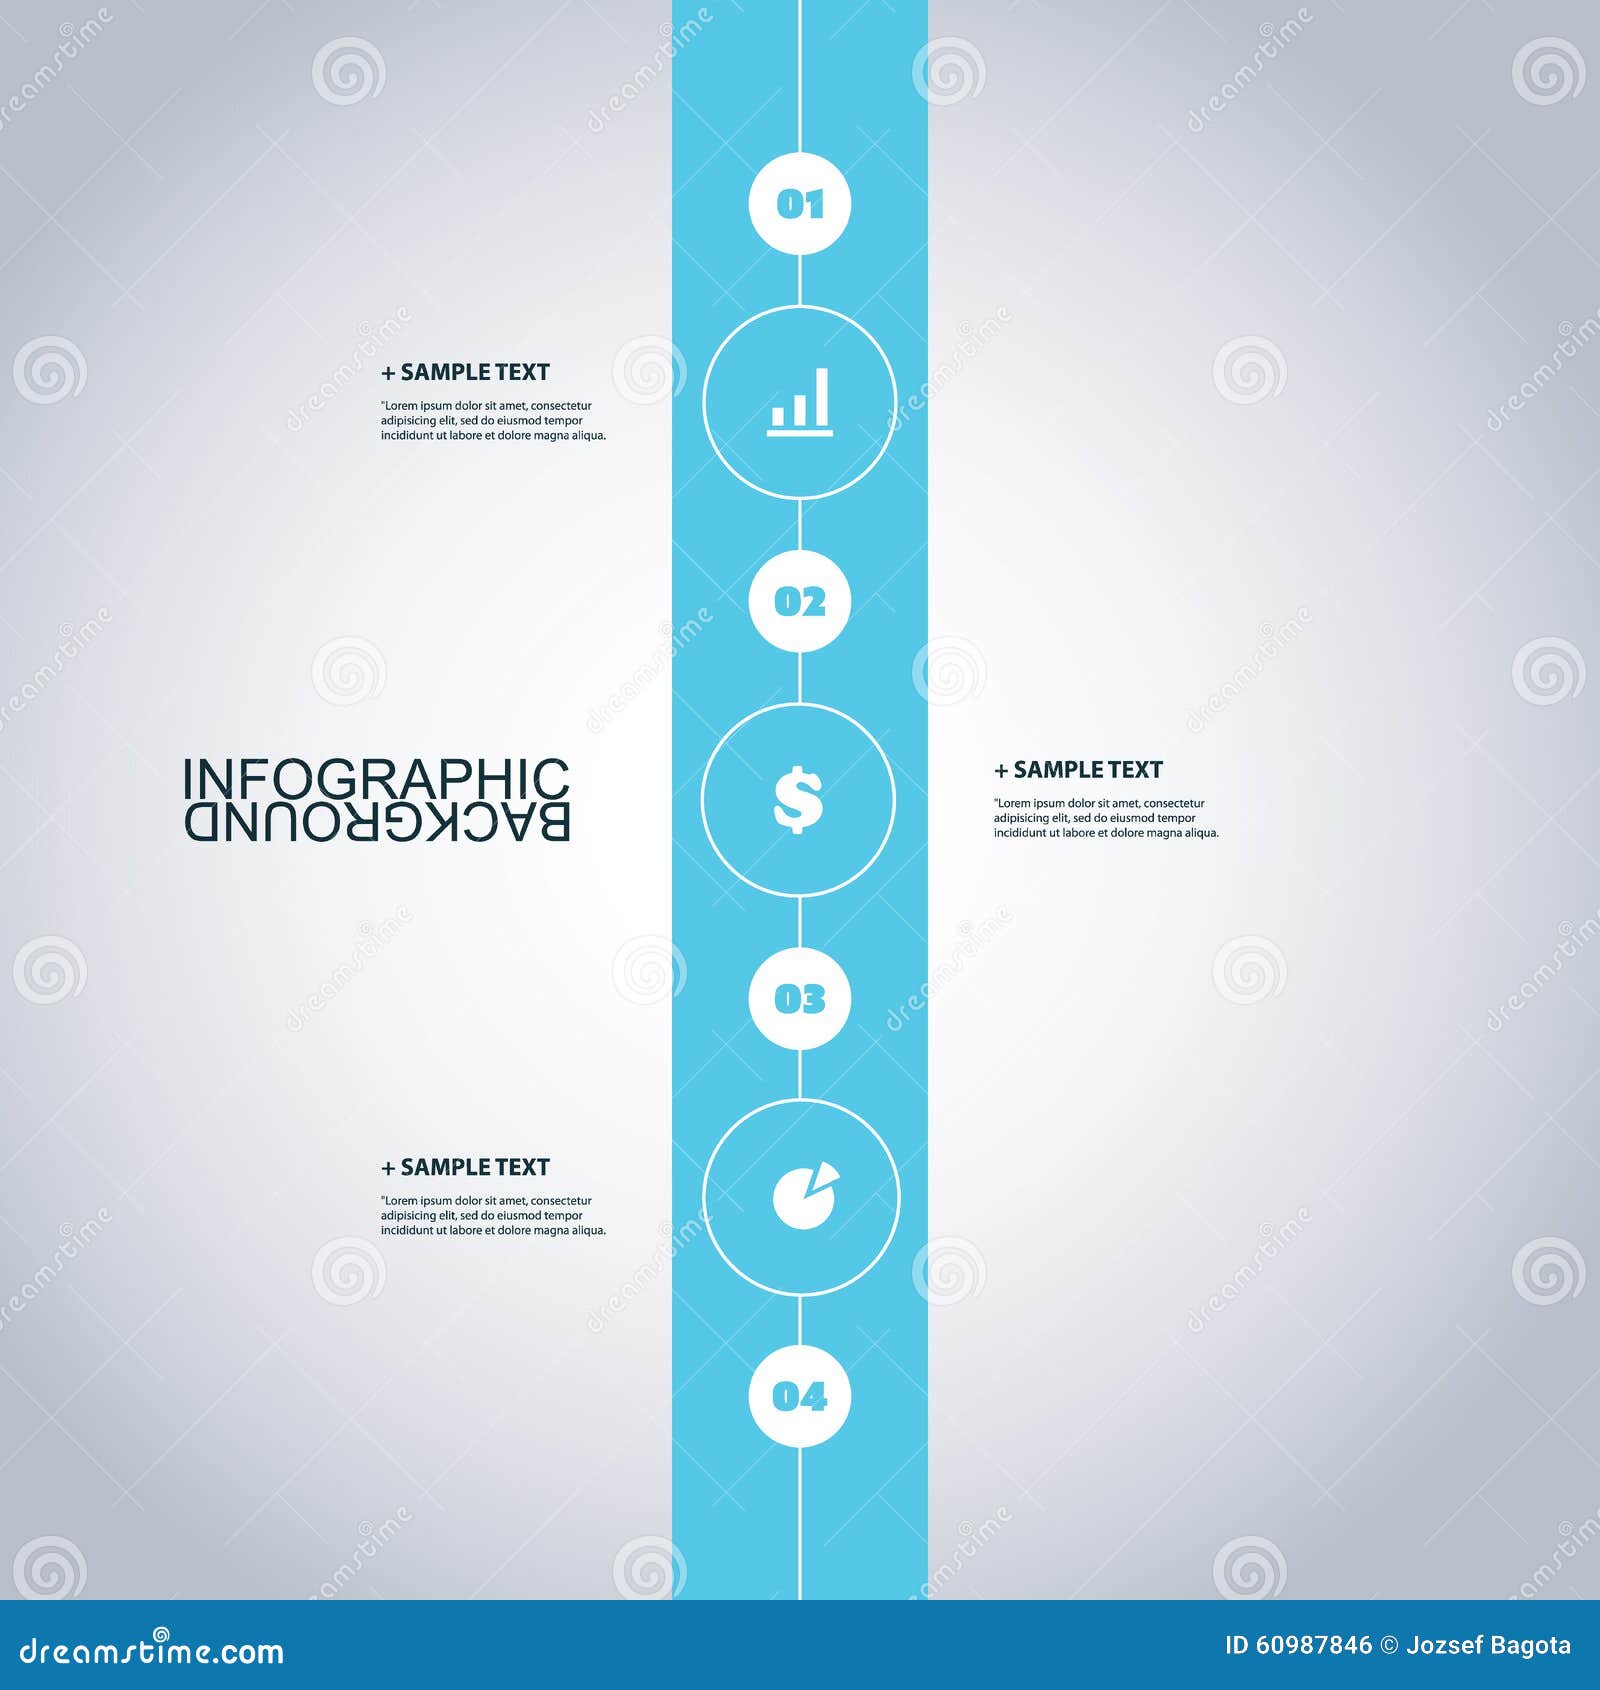 chart shape format Elements Icons   Timeline Minimal With Design Infographic